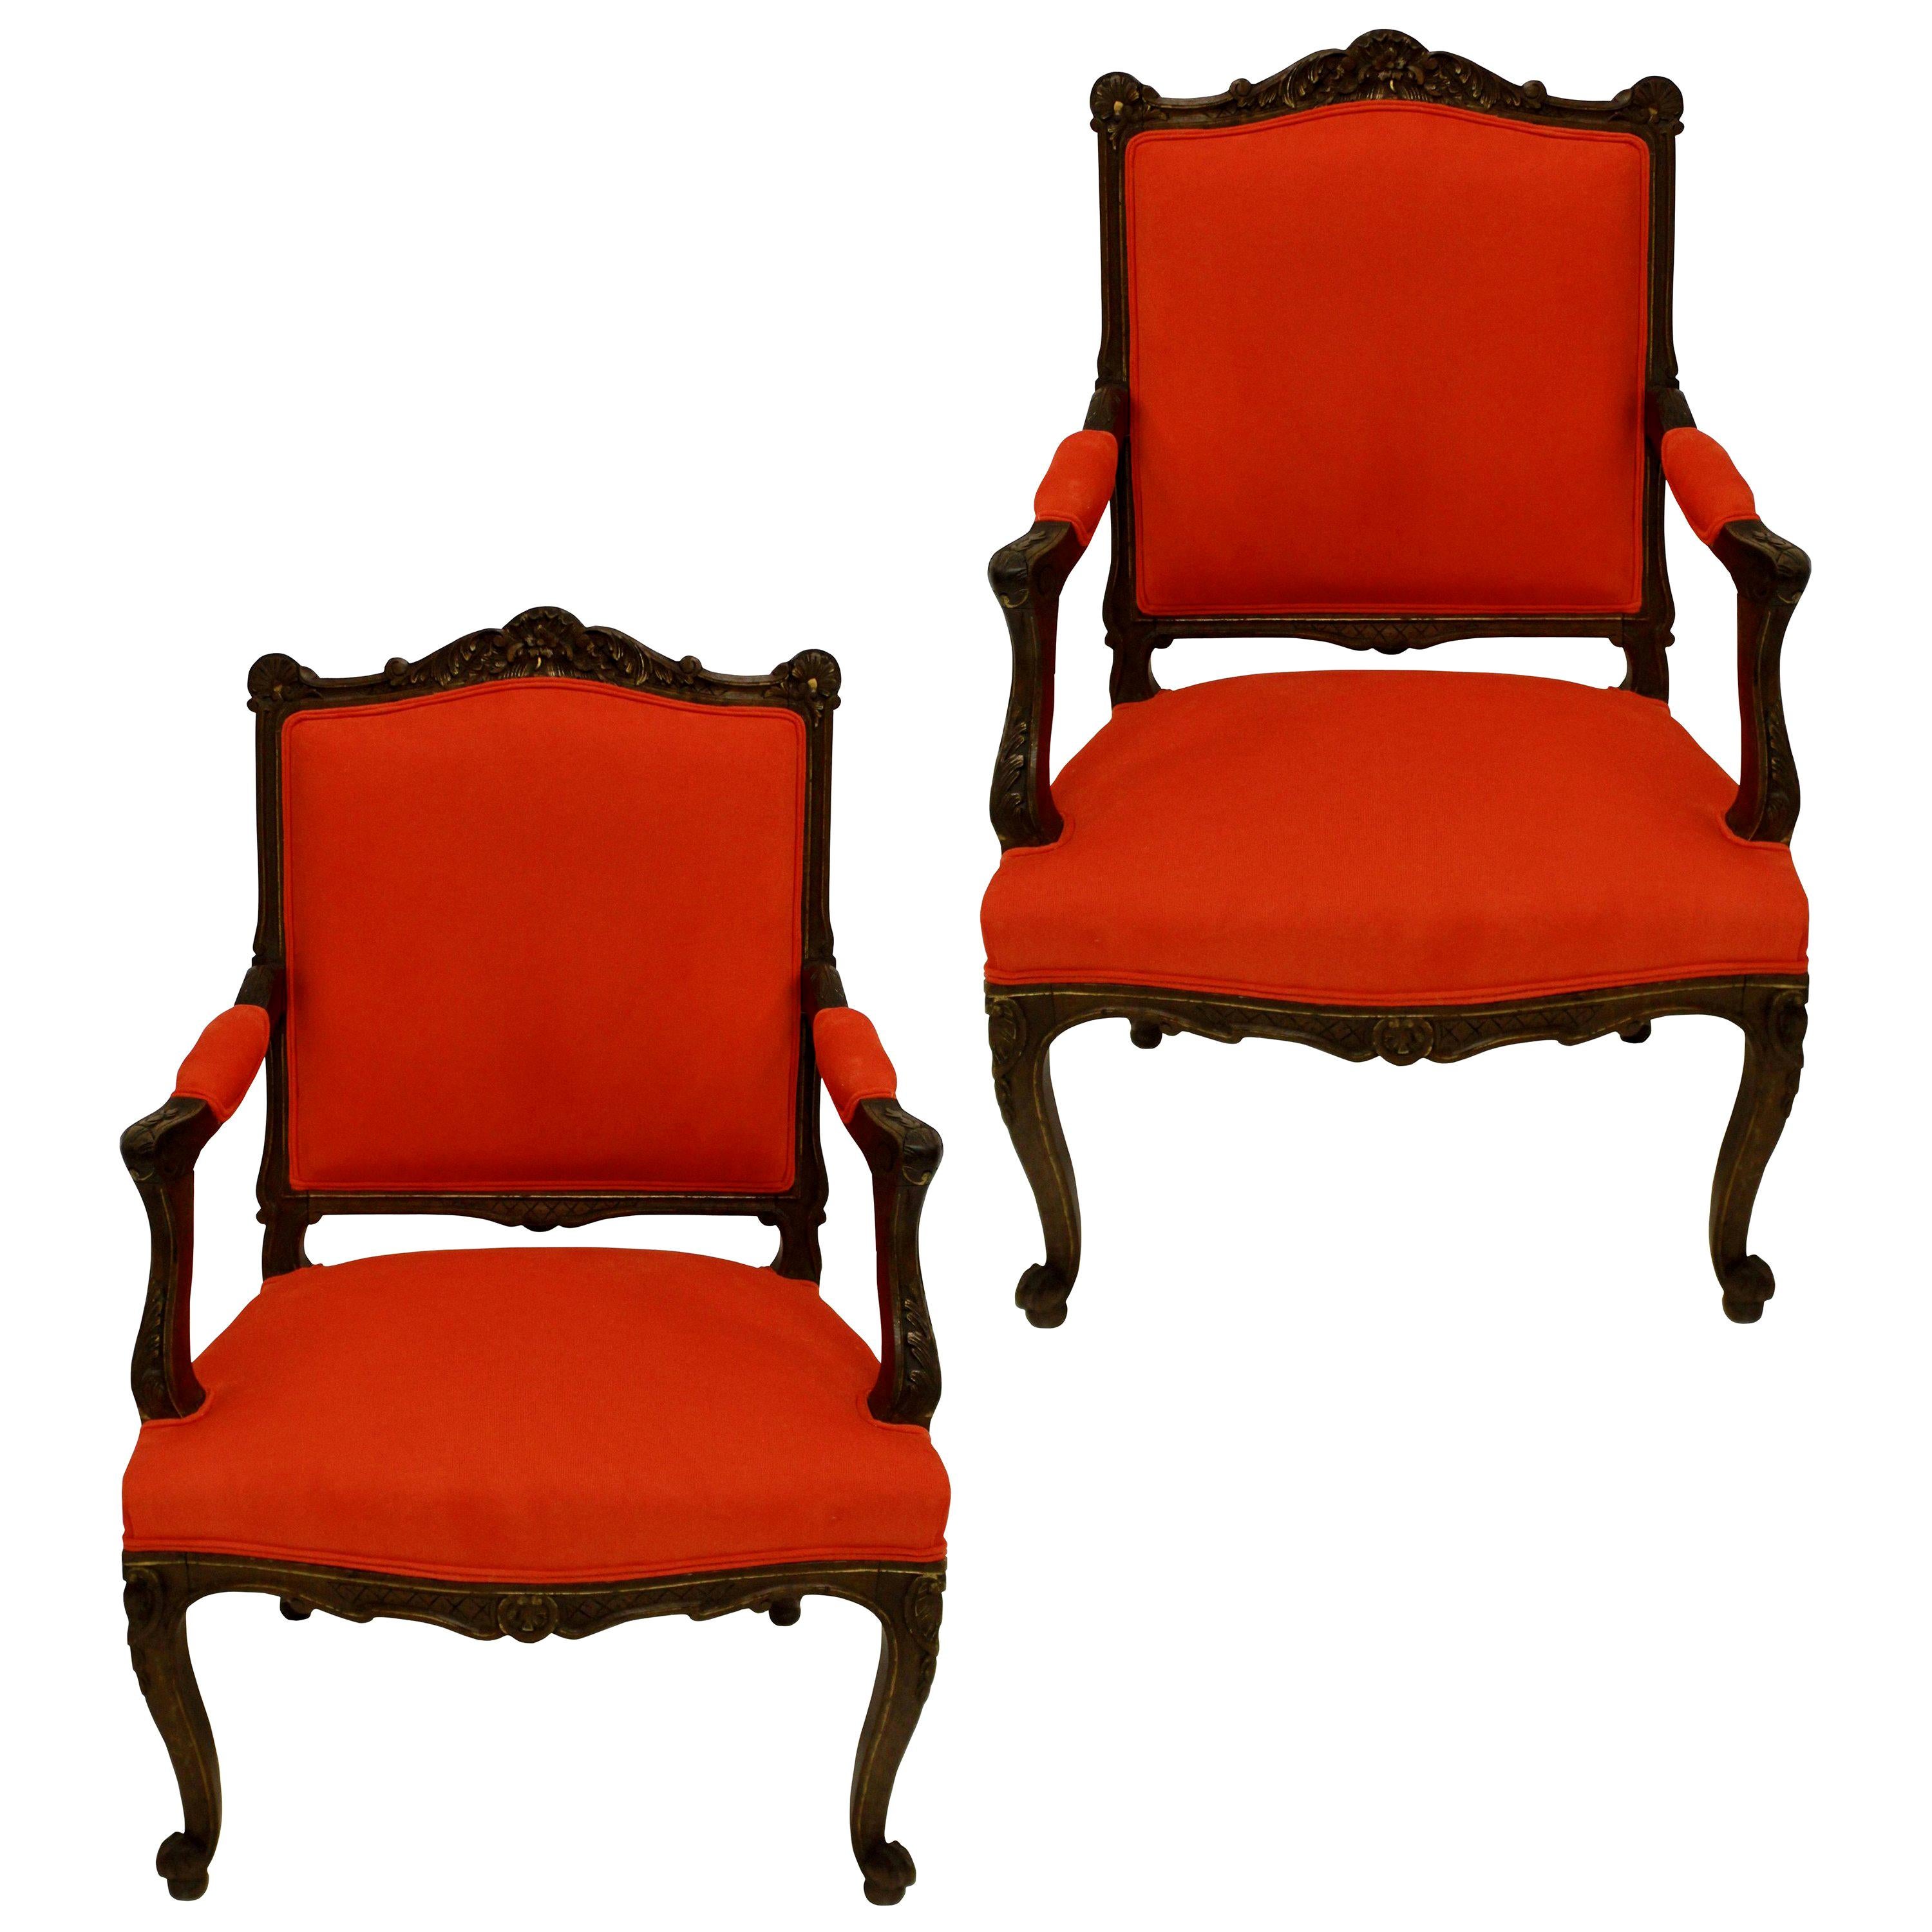 A pair of French Louis XV style walnut armchairs, beautifully carved with highlighted gilding in places, newly upholstered in blood orange corduroy.

 